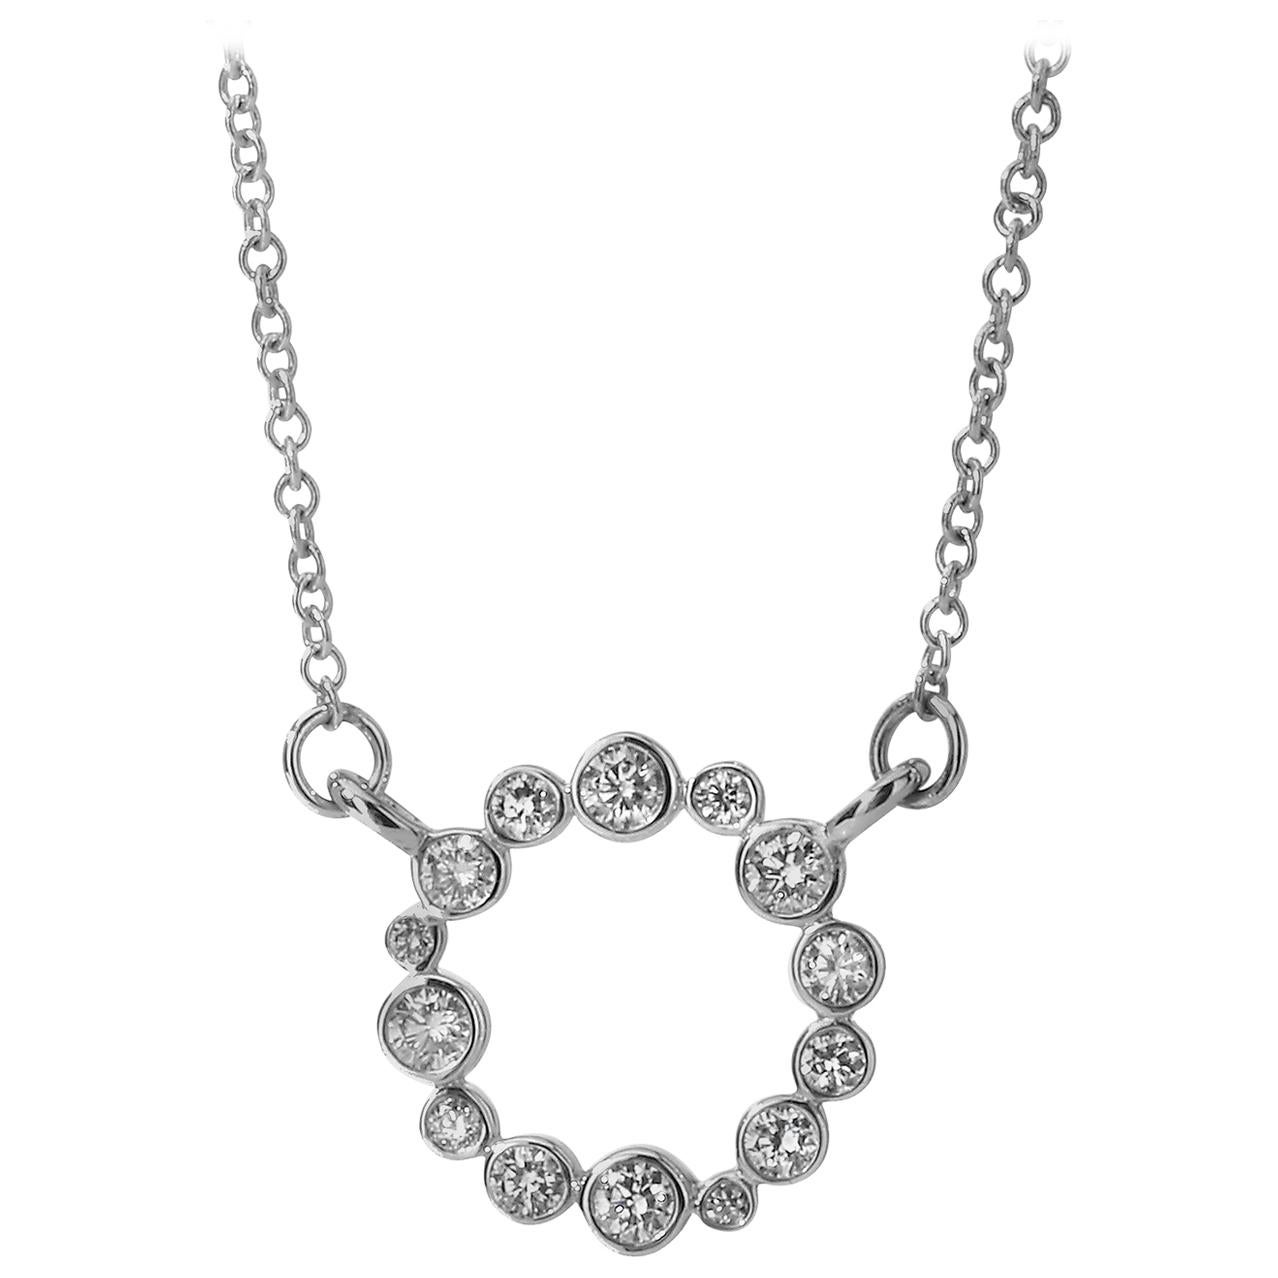 Syna White Gold Necklace with Diamonds